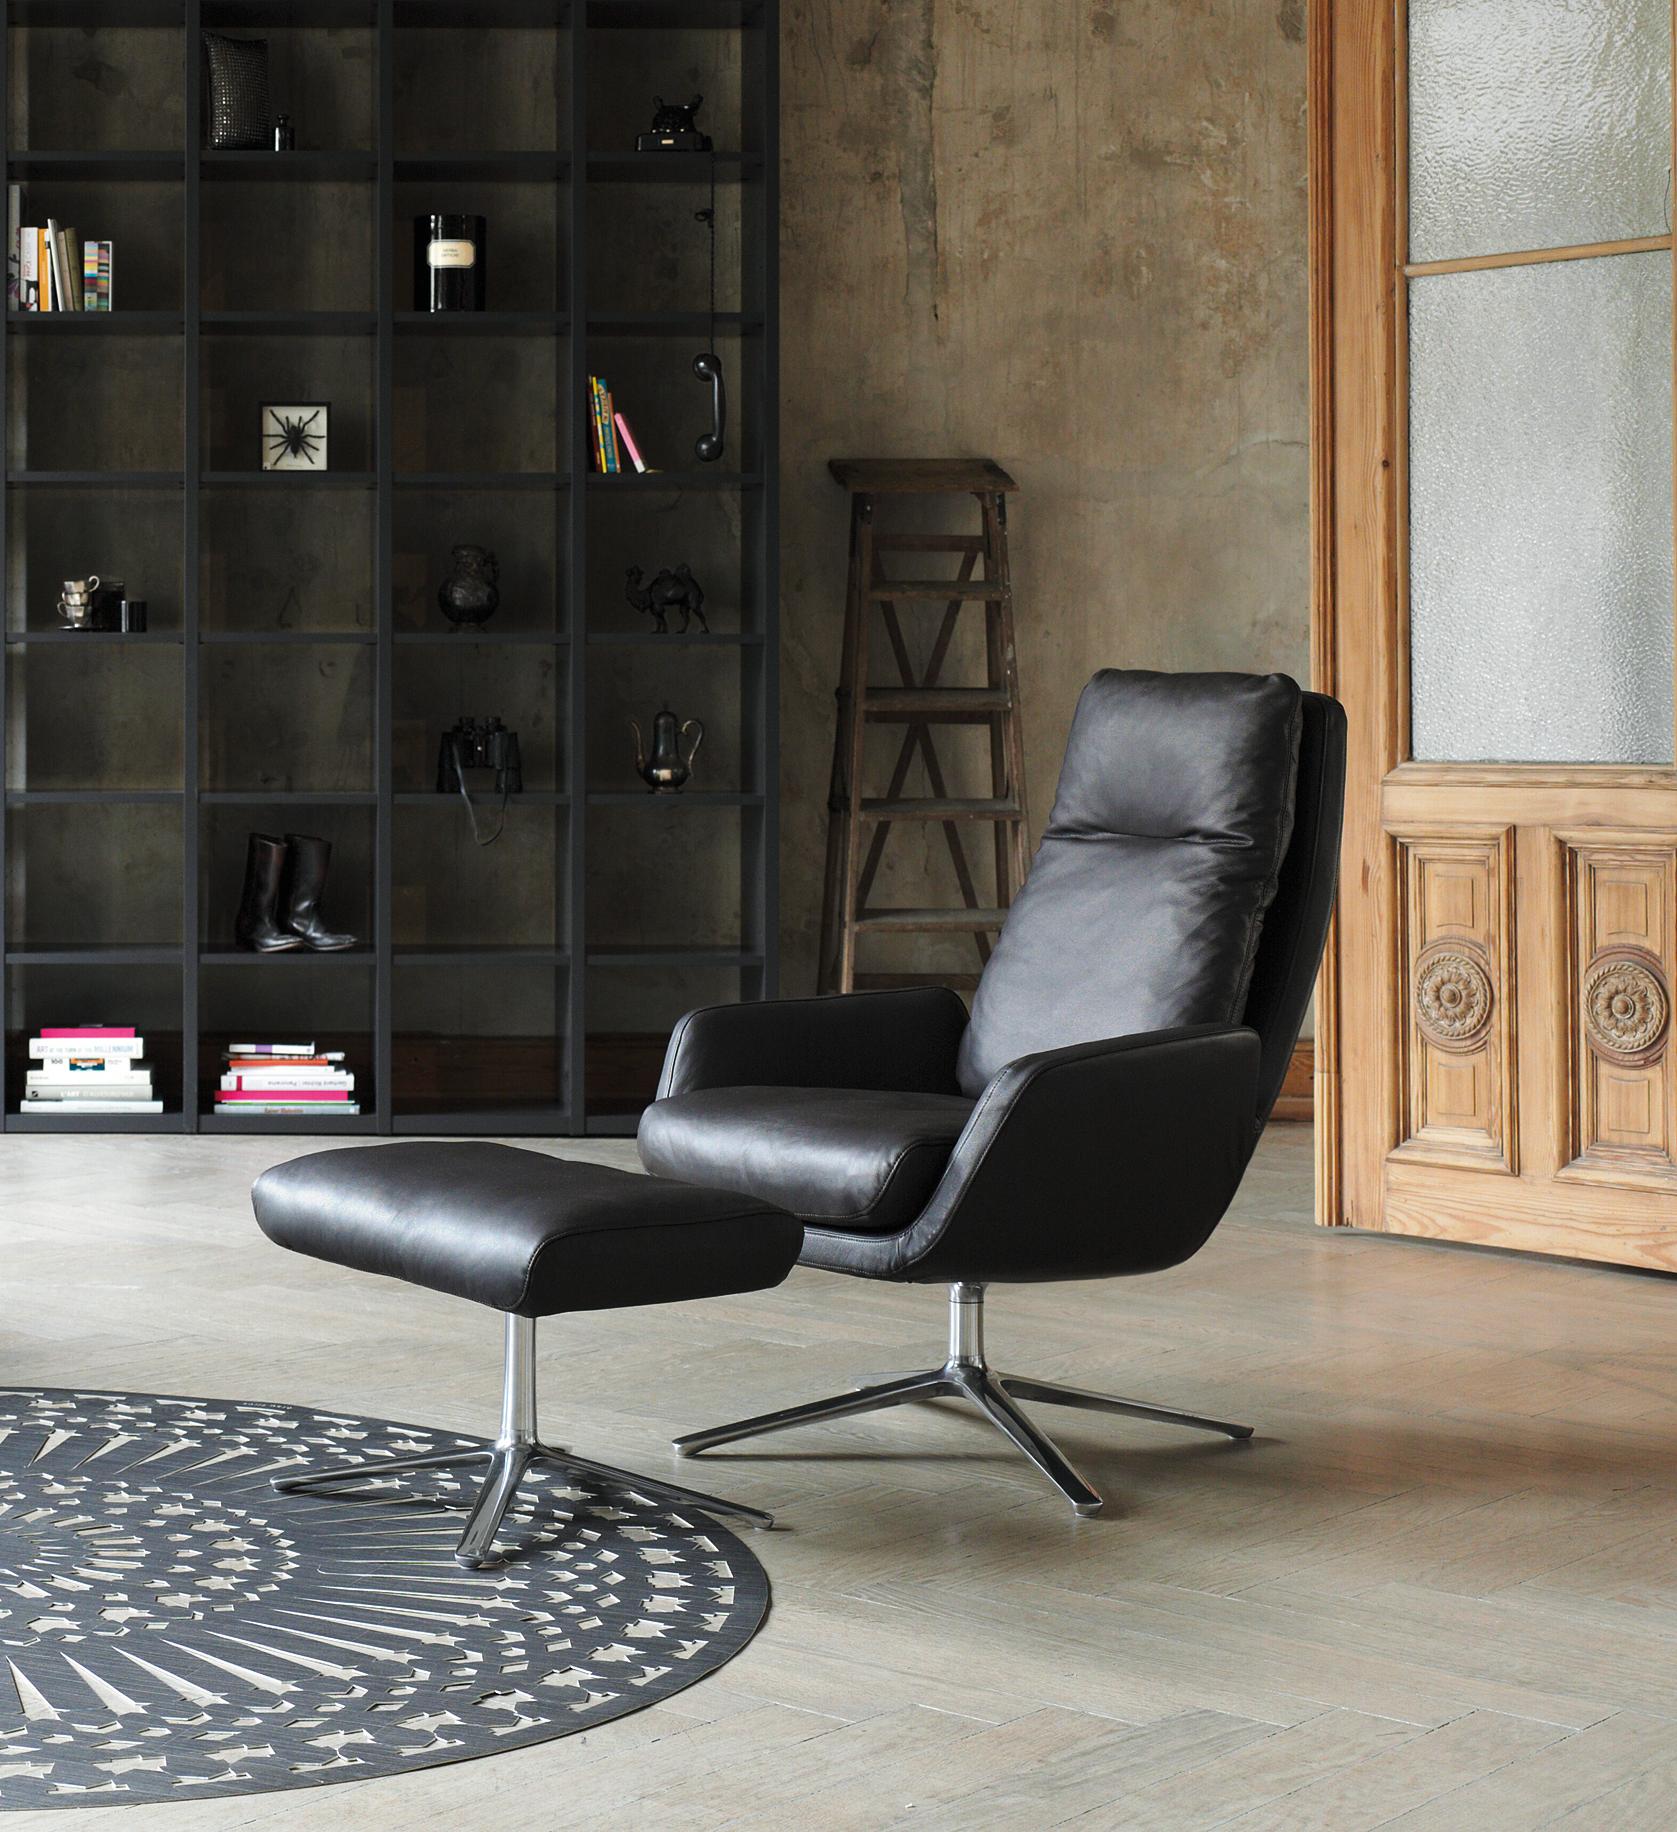 The first lounge chair by COR, and the coziest.